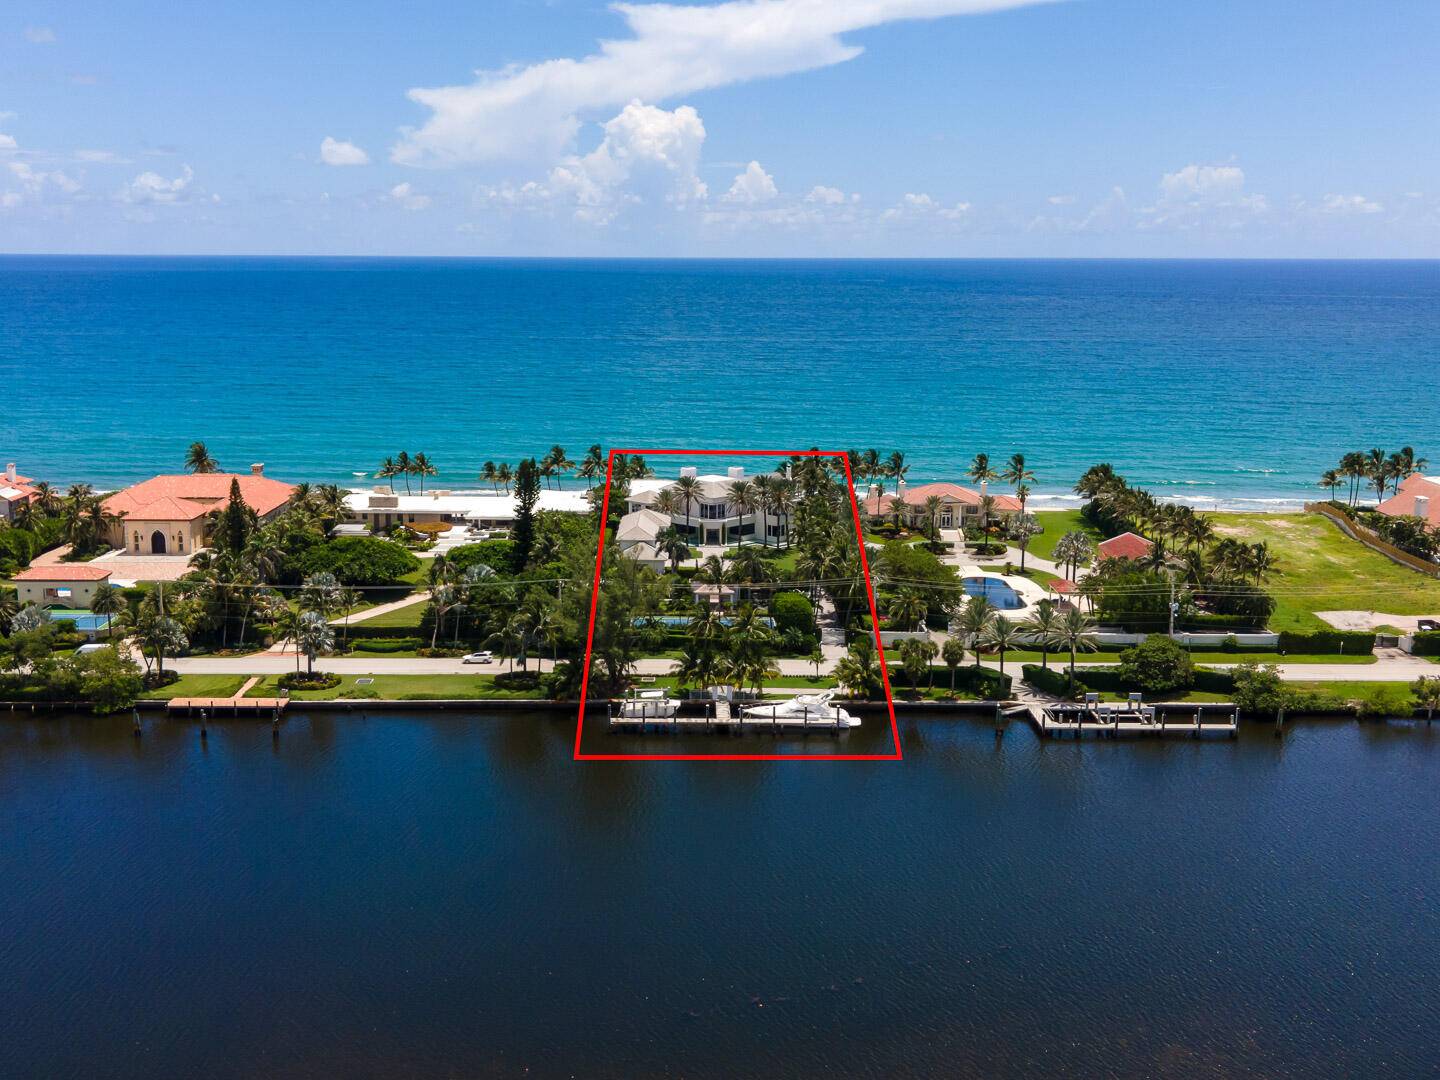 Spectacular Ocean to Lake estate with 7 bedrooms, 8 bathrooms and 3 half baths.